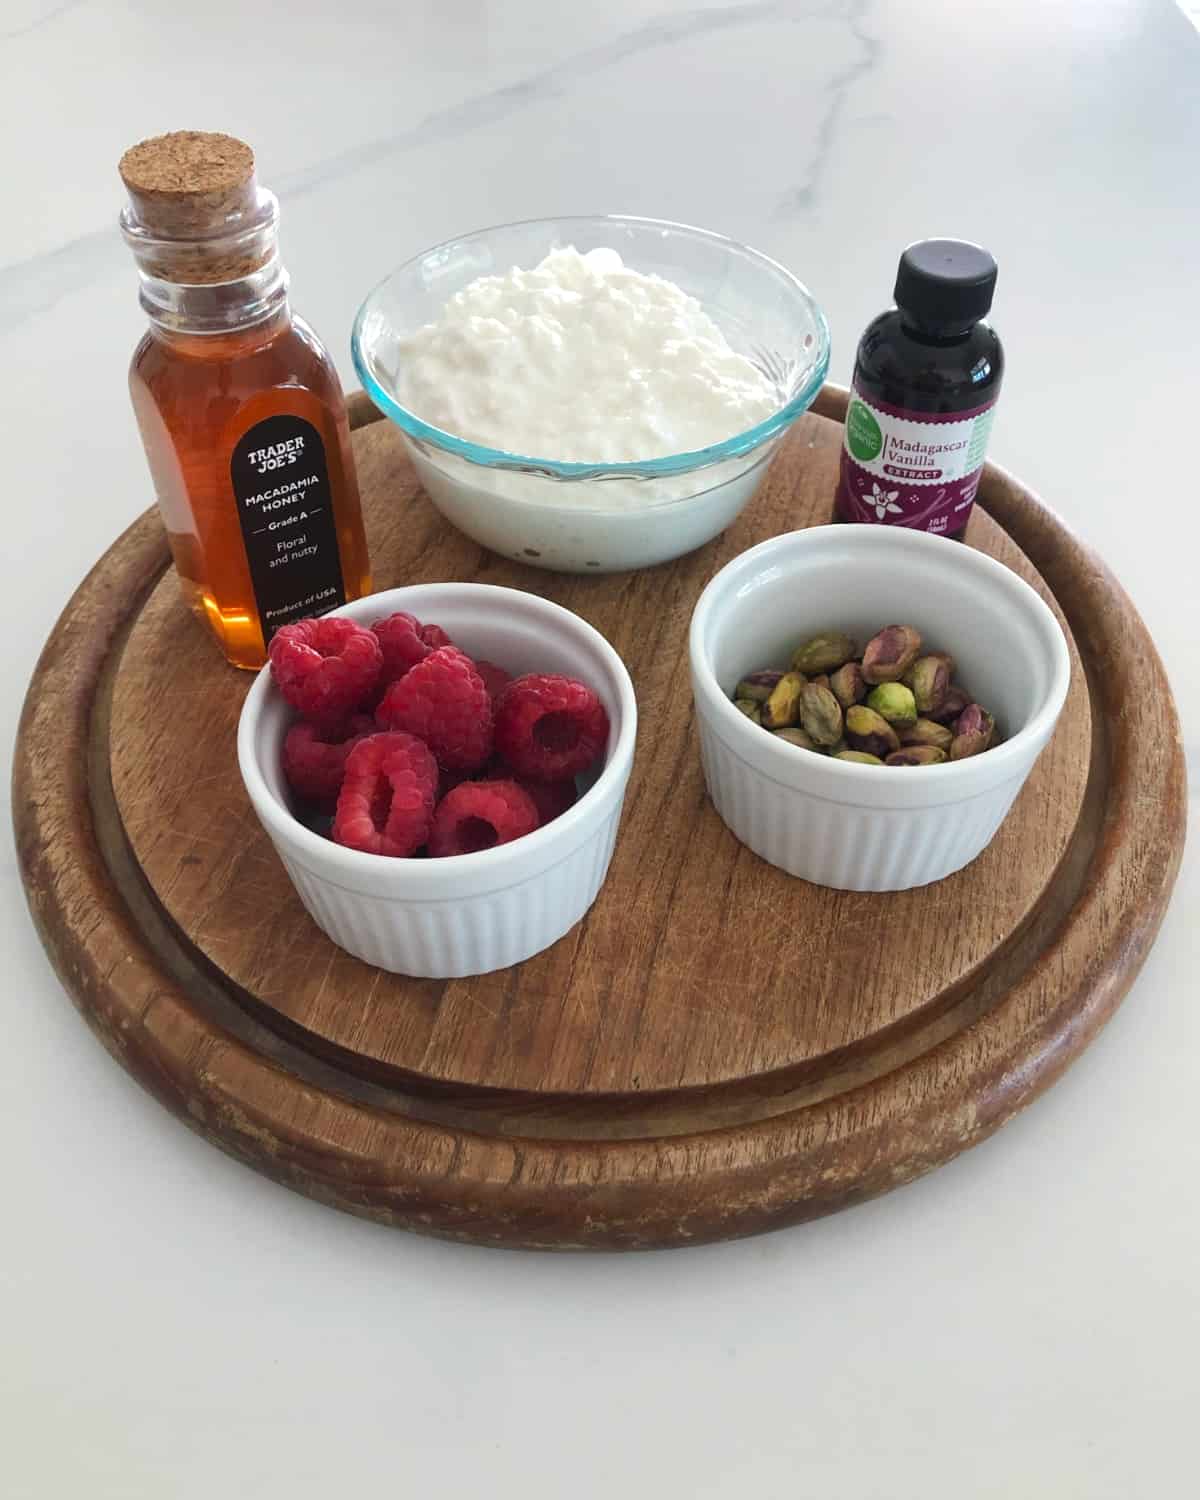 Ingredients for making no-bake cheesecake cups, including honey, cottage cheese, vanilla extract, fresh raspberries and pistachios.